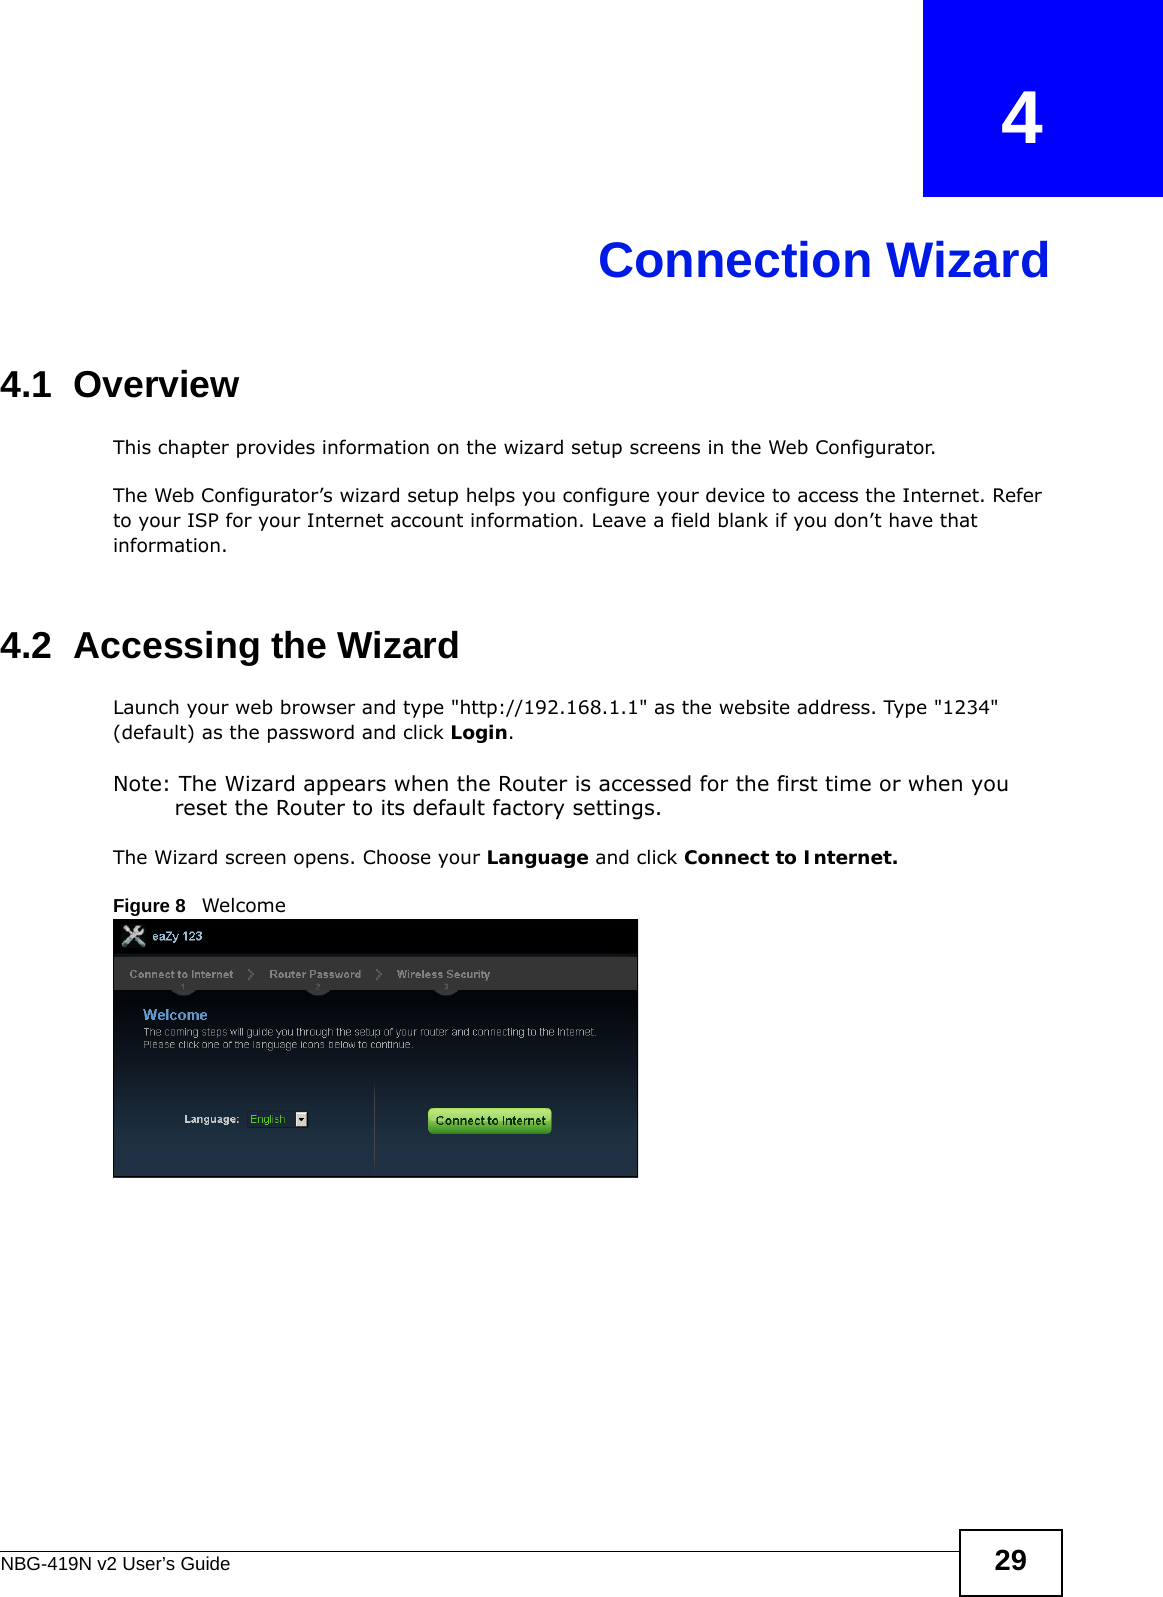 NBG-419N v2 User’s Guide 29CHAPTER   4Connection Wizard4.1  OverviewThis chapter provides information on the wizard setup screens in the Web Configurator.The Web Configurator’s wizard setup helps you configure your device to access the Internet. Refer to your ISP for your Internet account information. Leave a field blank if you don’t have that information.4.2  Accessing the WizardLaunch your web browser and type &quot;http://192.168.1.1&quot; as the website address. Type &quot;1234&quot; (default) as the password and click Login.Note: The Wizard appears when the Router is accessed for the first time or when you reset the Router to its default factory settings.The Wizard screen opens. Choose your Language and click Connect to Internet.Figure 8   Welcome 